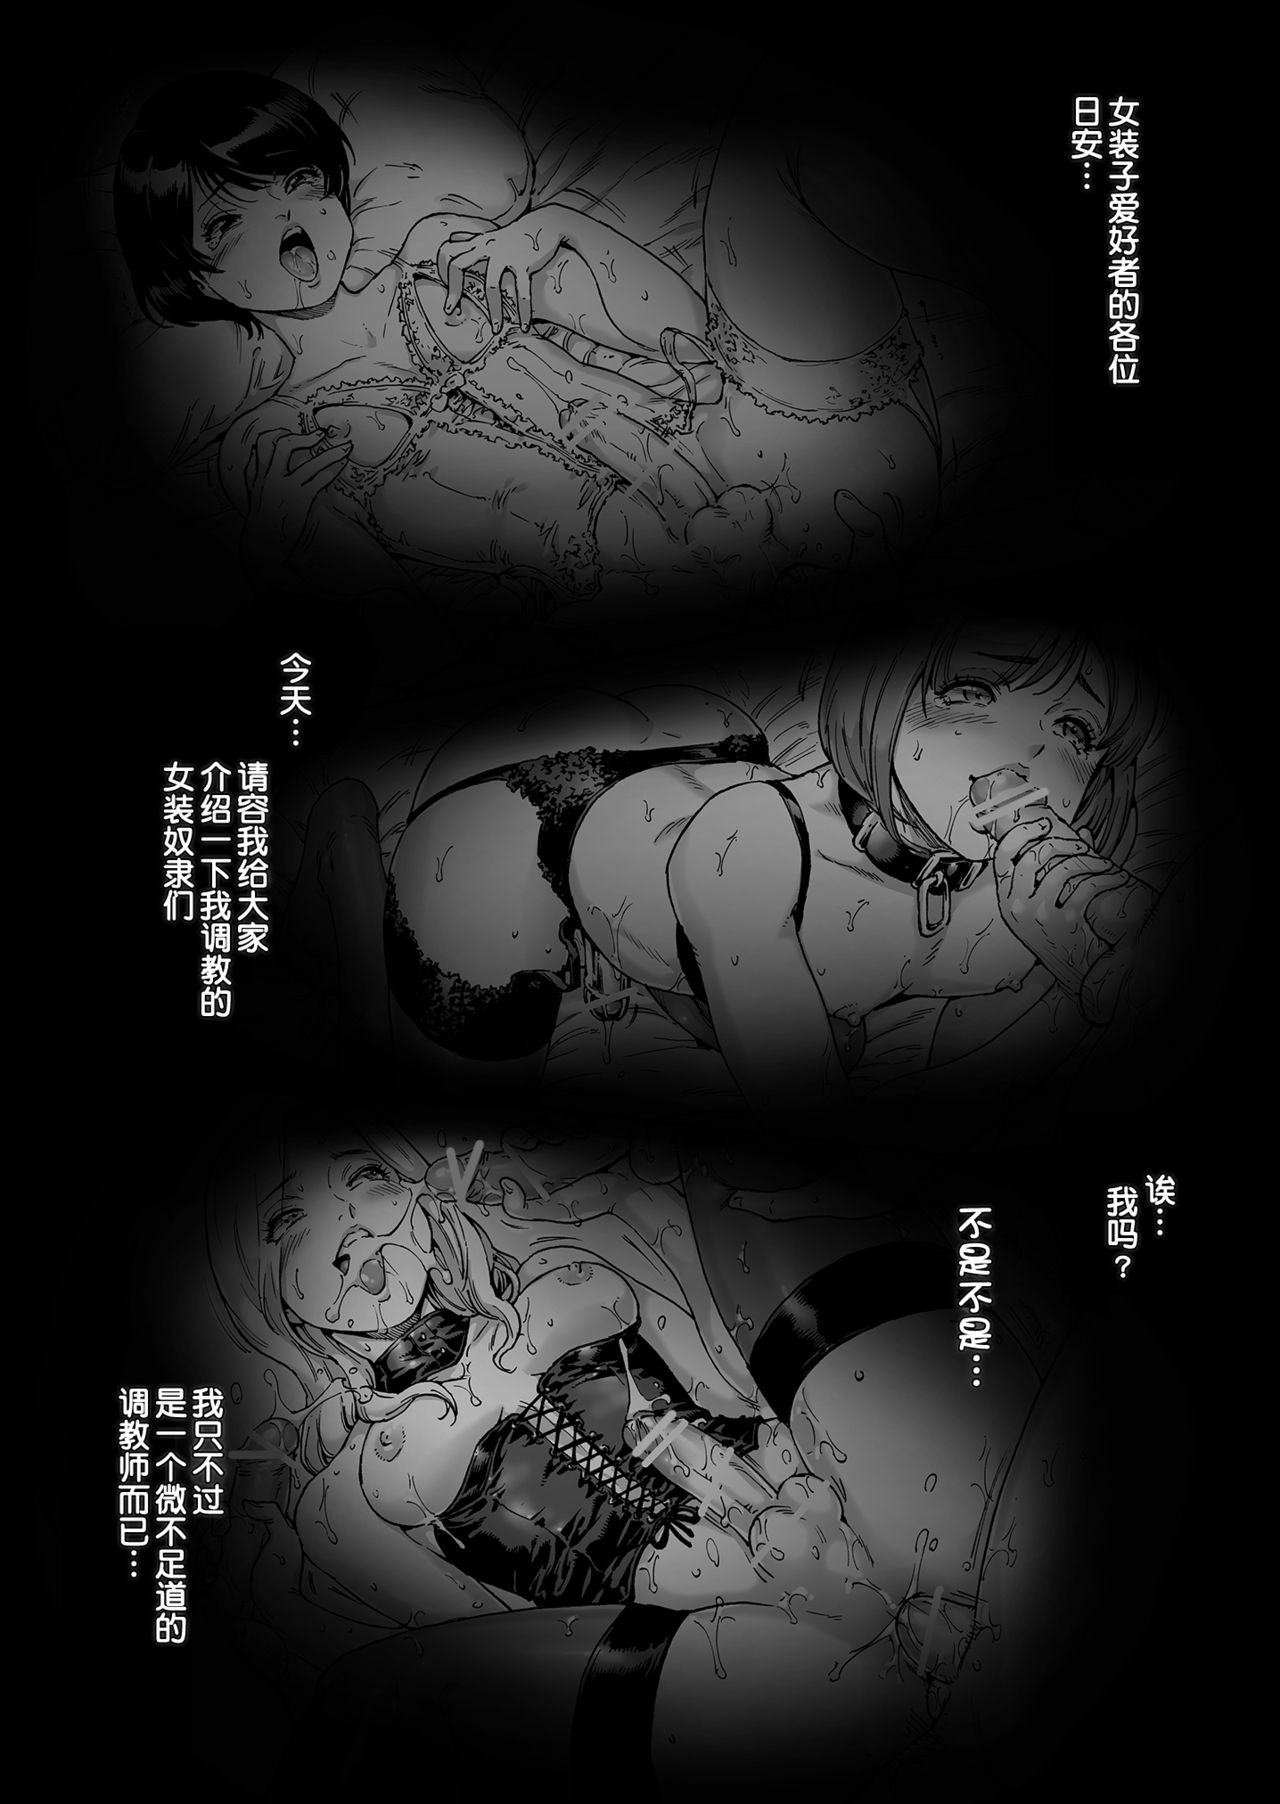 [Shotaian (Aian)] Appetizer. [Chinese] [鬼畜王汉化组] page 2 full